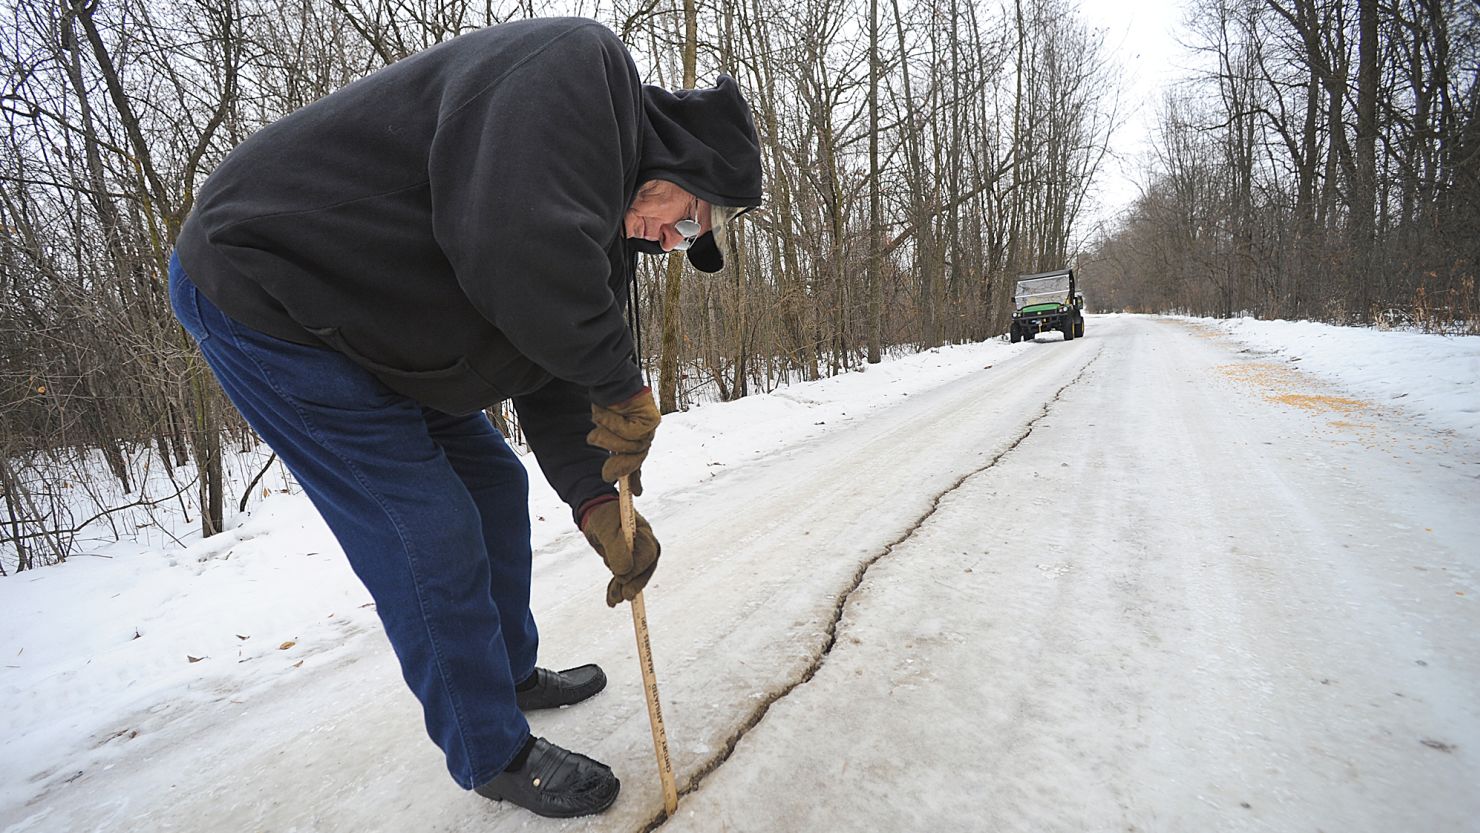 In a Saturday, Jan. 11, 2014 photo, Dennis Olsen measures a giant fissure, which he measured to be an inch wide and at least eight to ten inches deep, in his rural driveway in Waupun, Wis., after a weather phenomenon known as an ice quake occured recently. It results from water freezing and expanding in the soil and bedrock. (AP Photo/The Reporter, Aileen Andrews) NO SALES